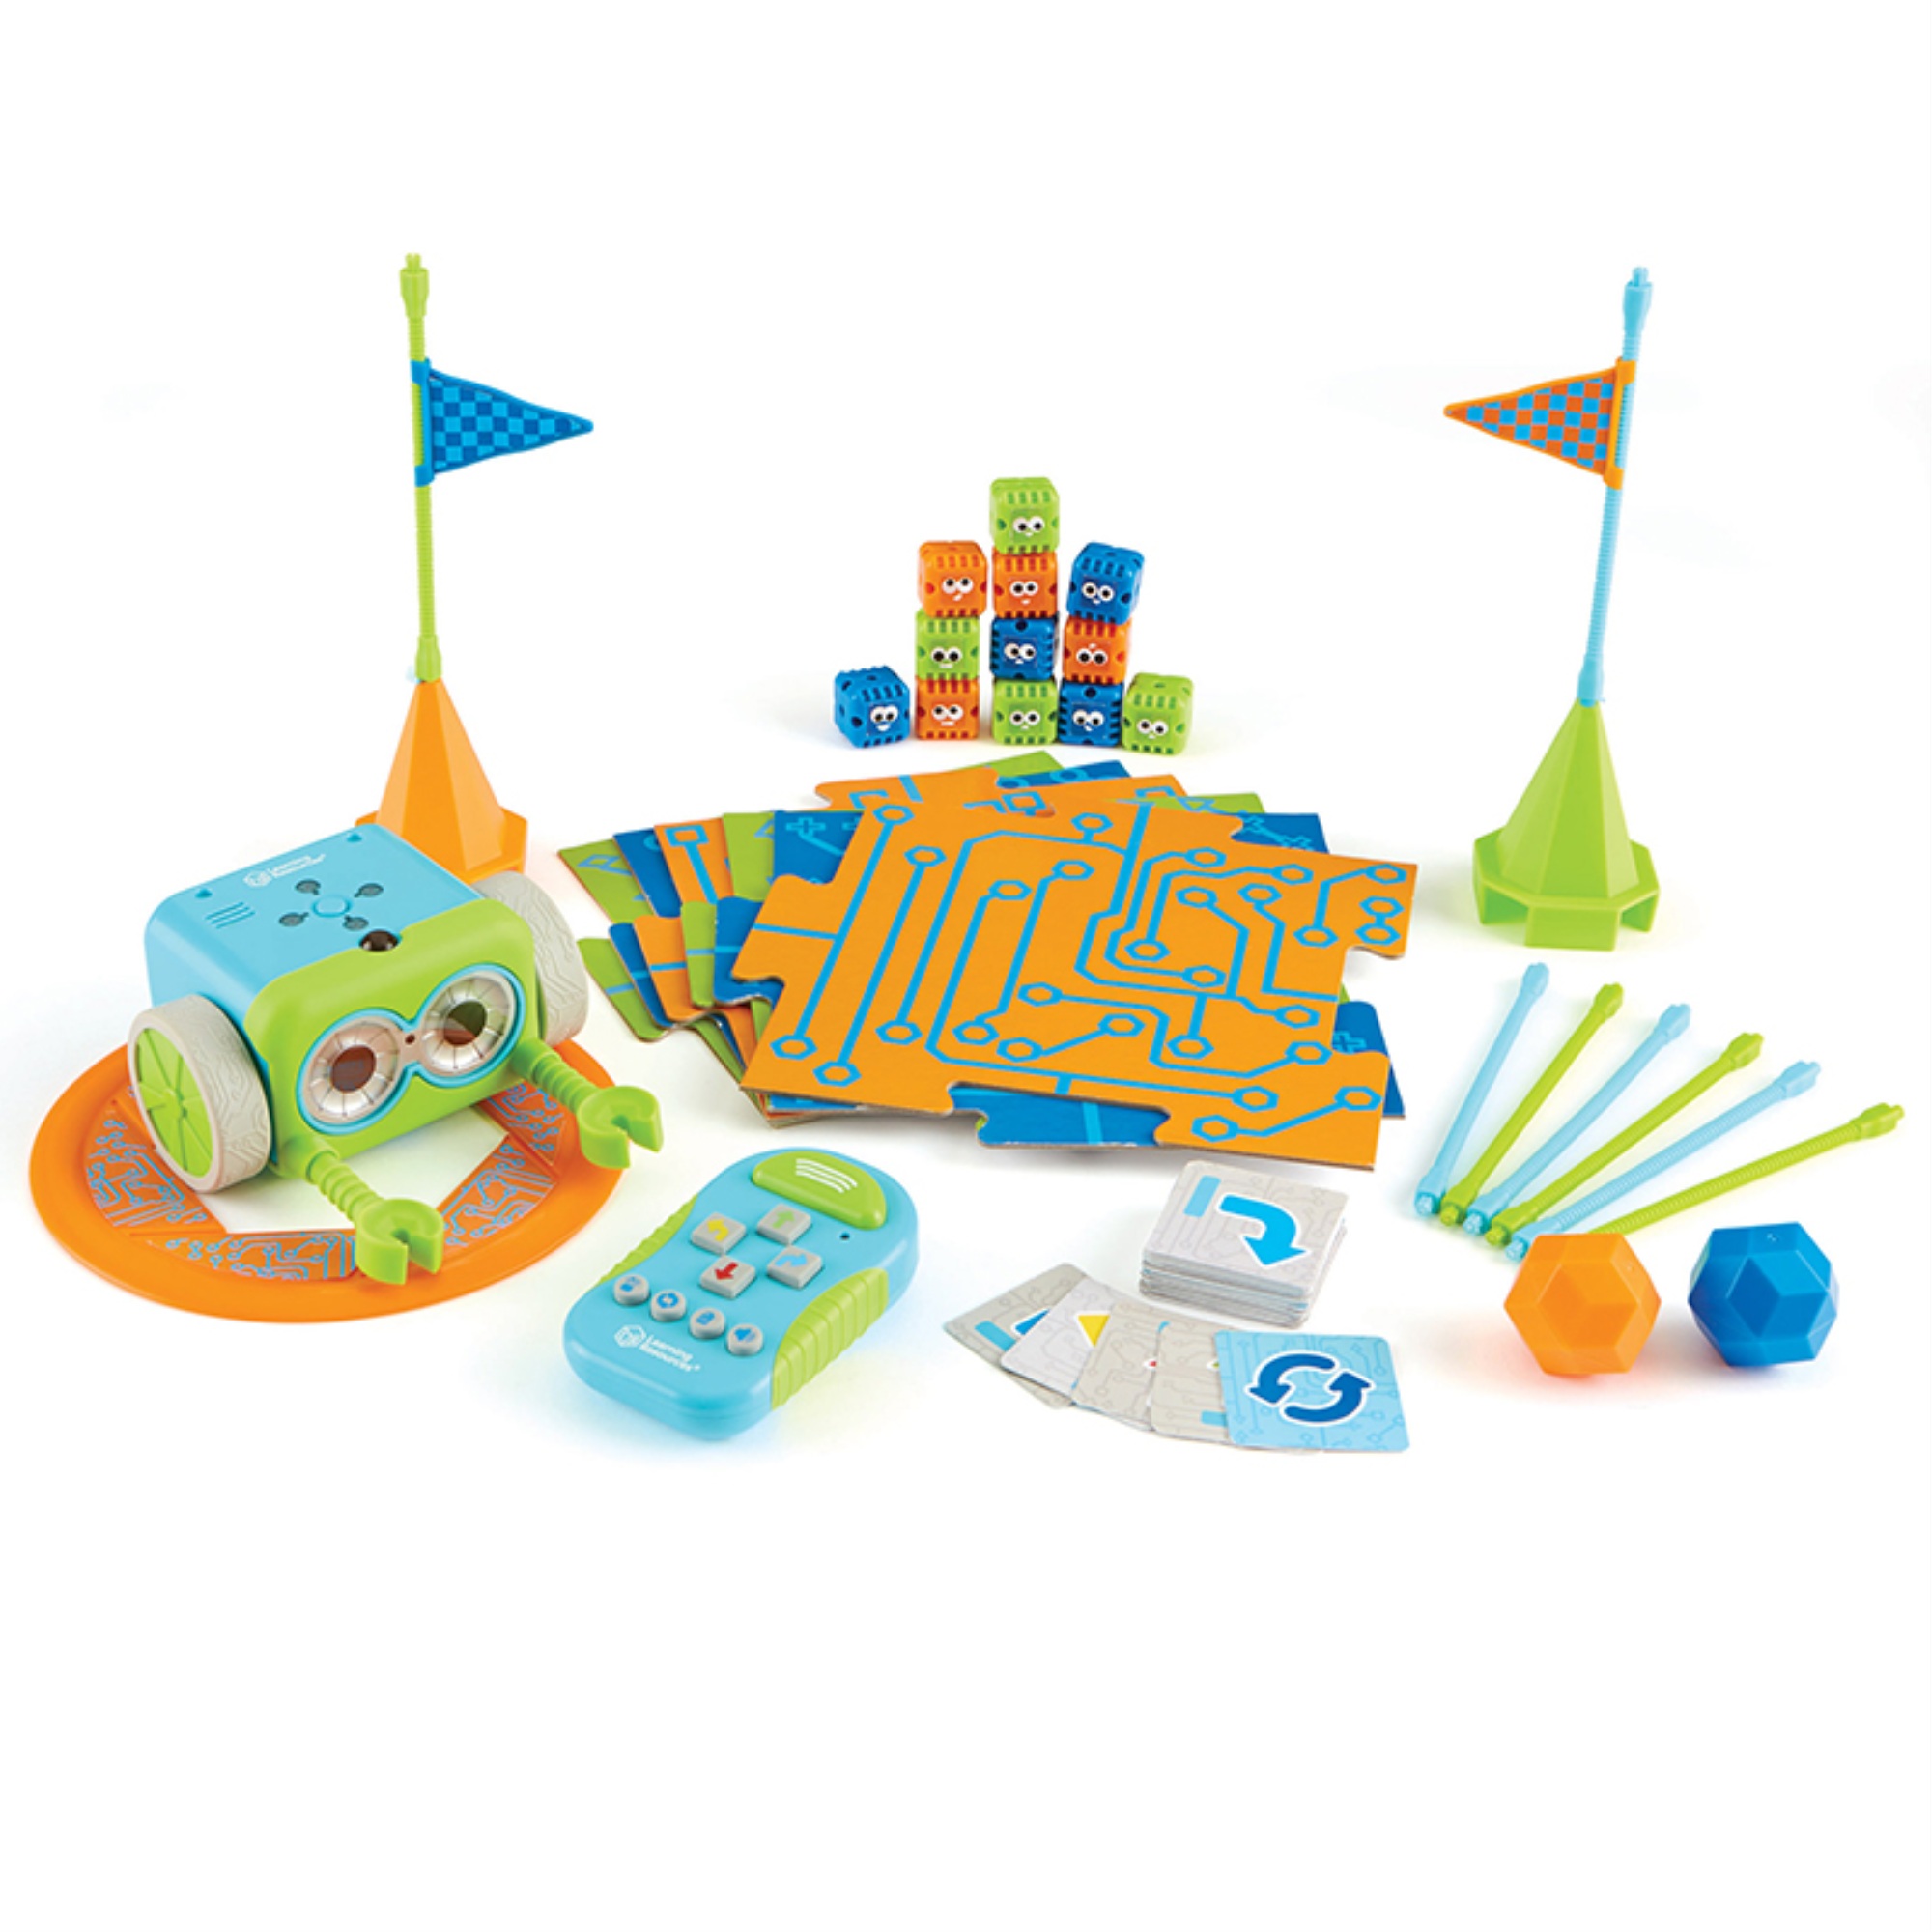 Botley the Coding Robot Activity Set - image 1 of 13